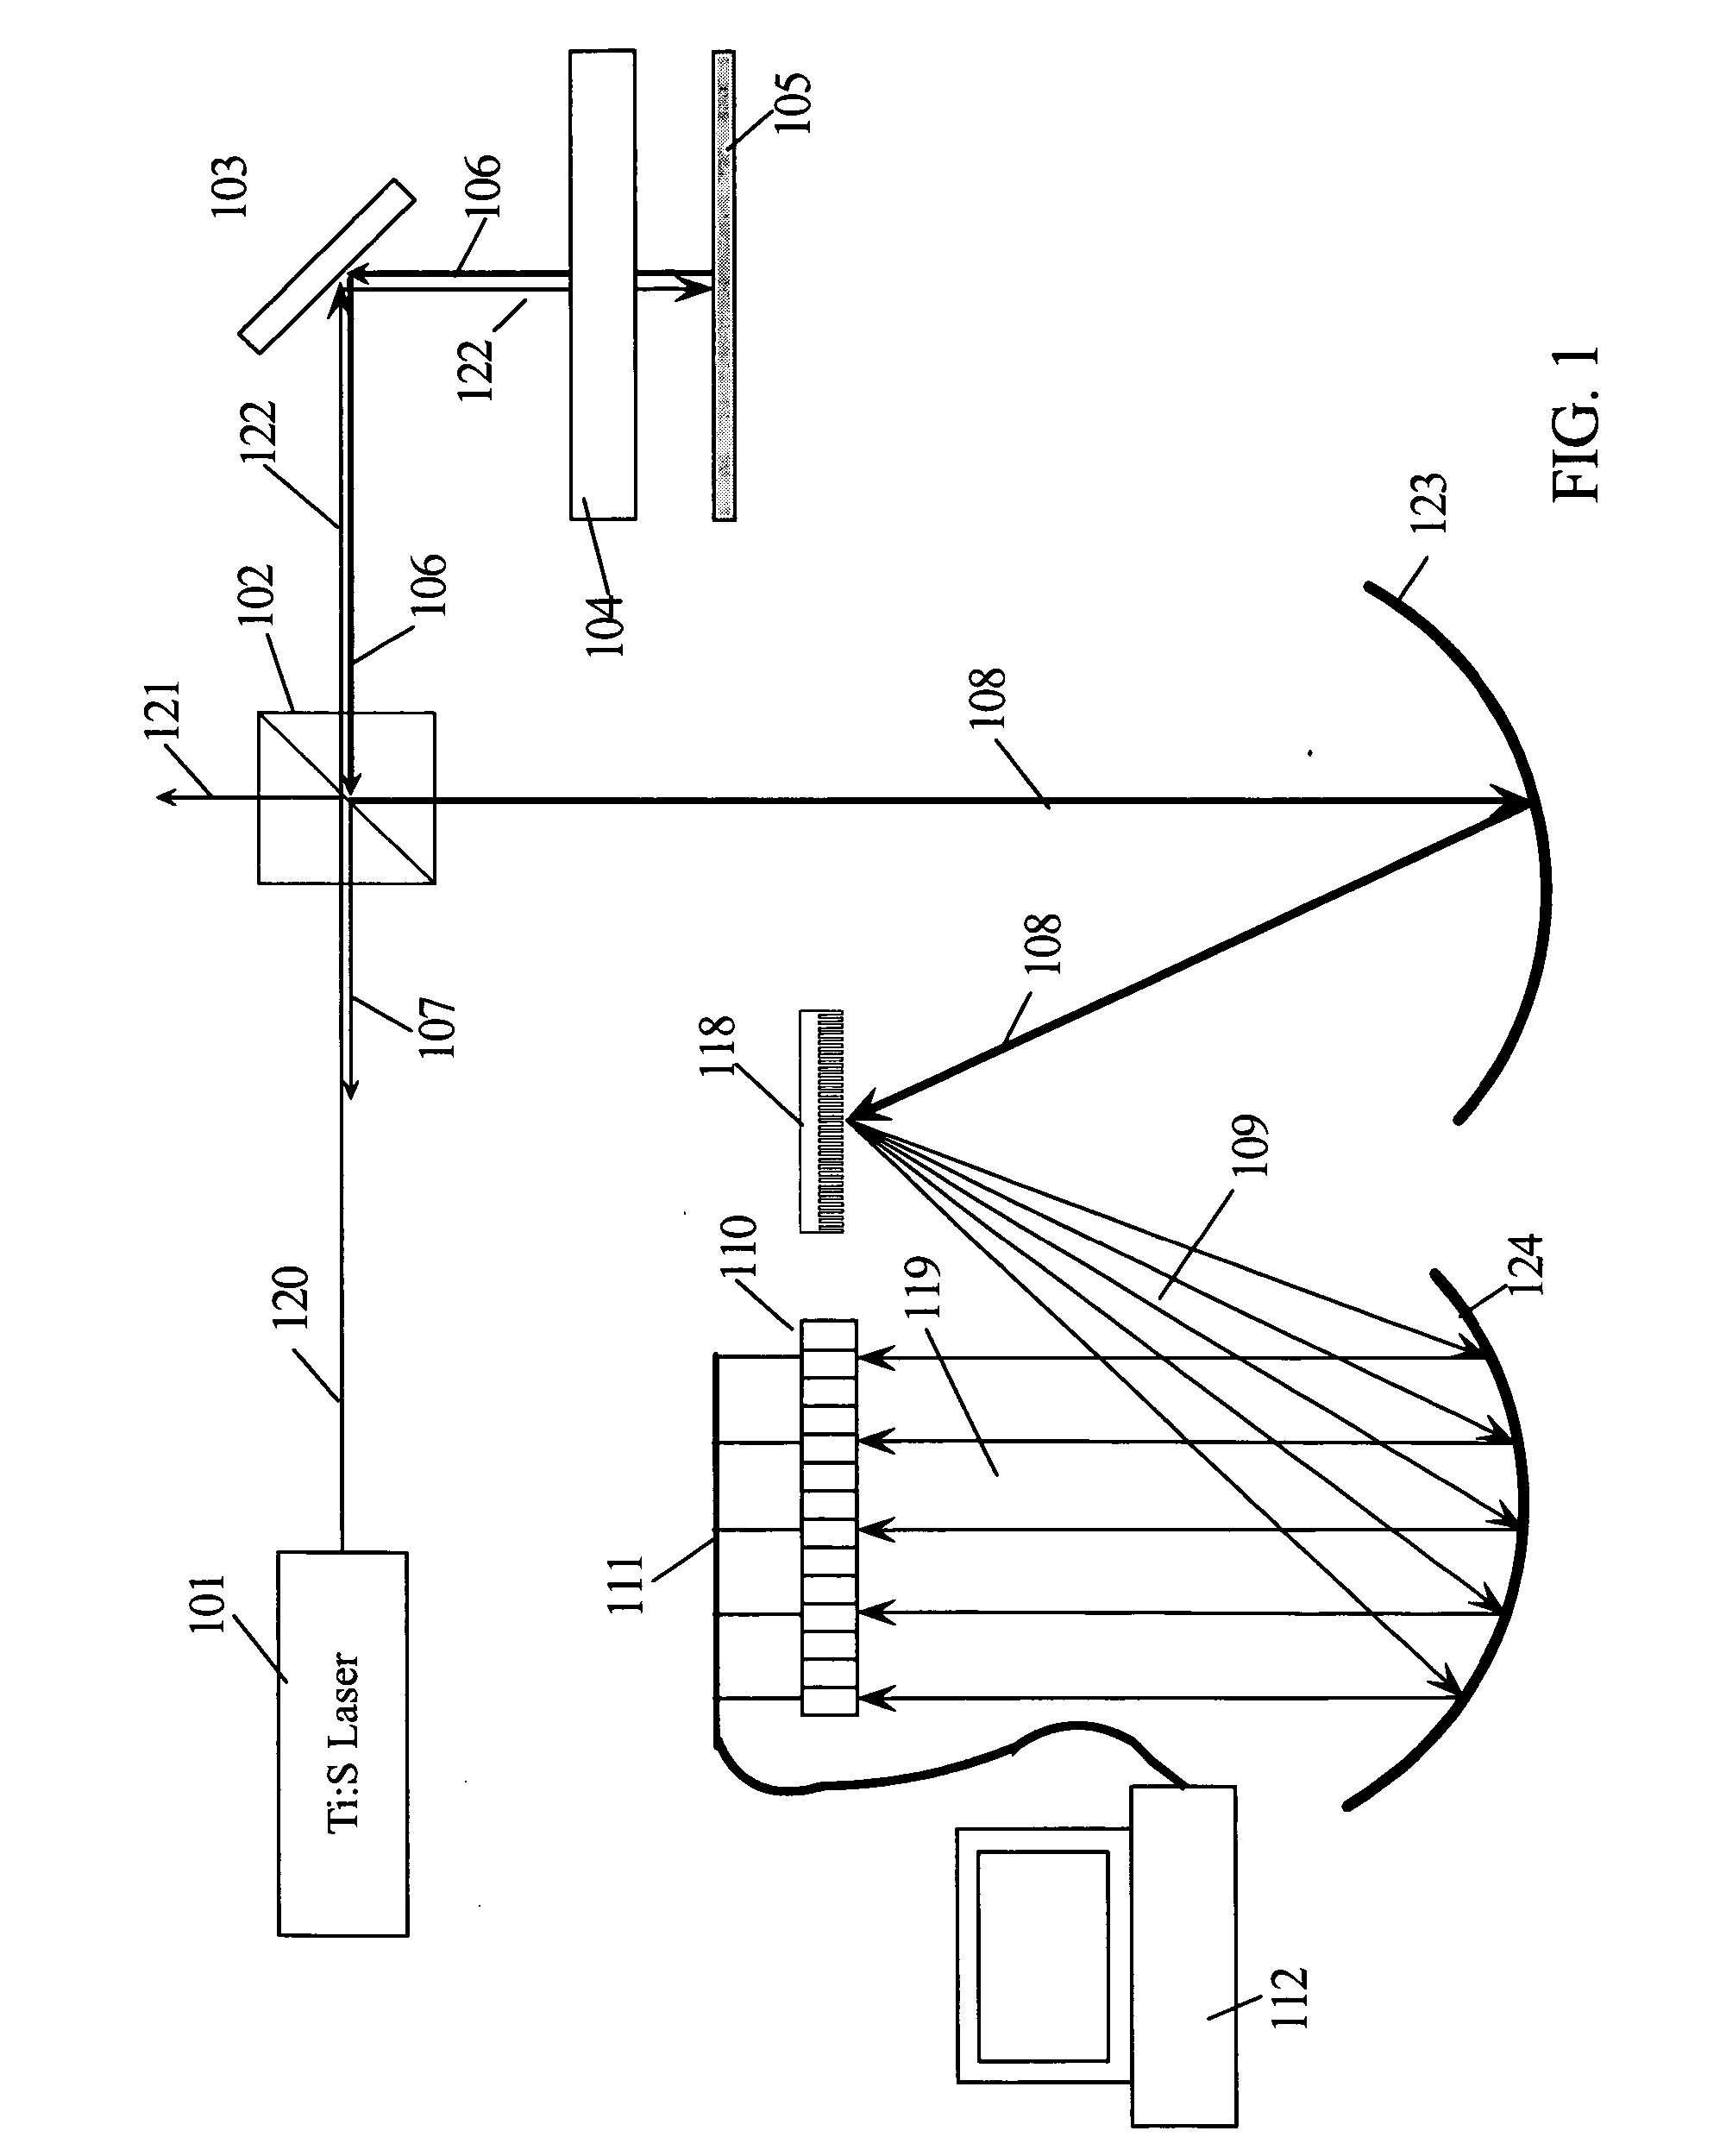 Broadband cavity spectrometer apparatus and method for determining the path length of an optical structure